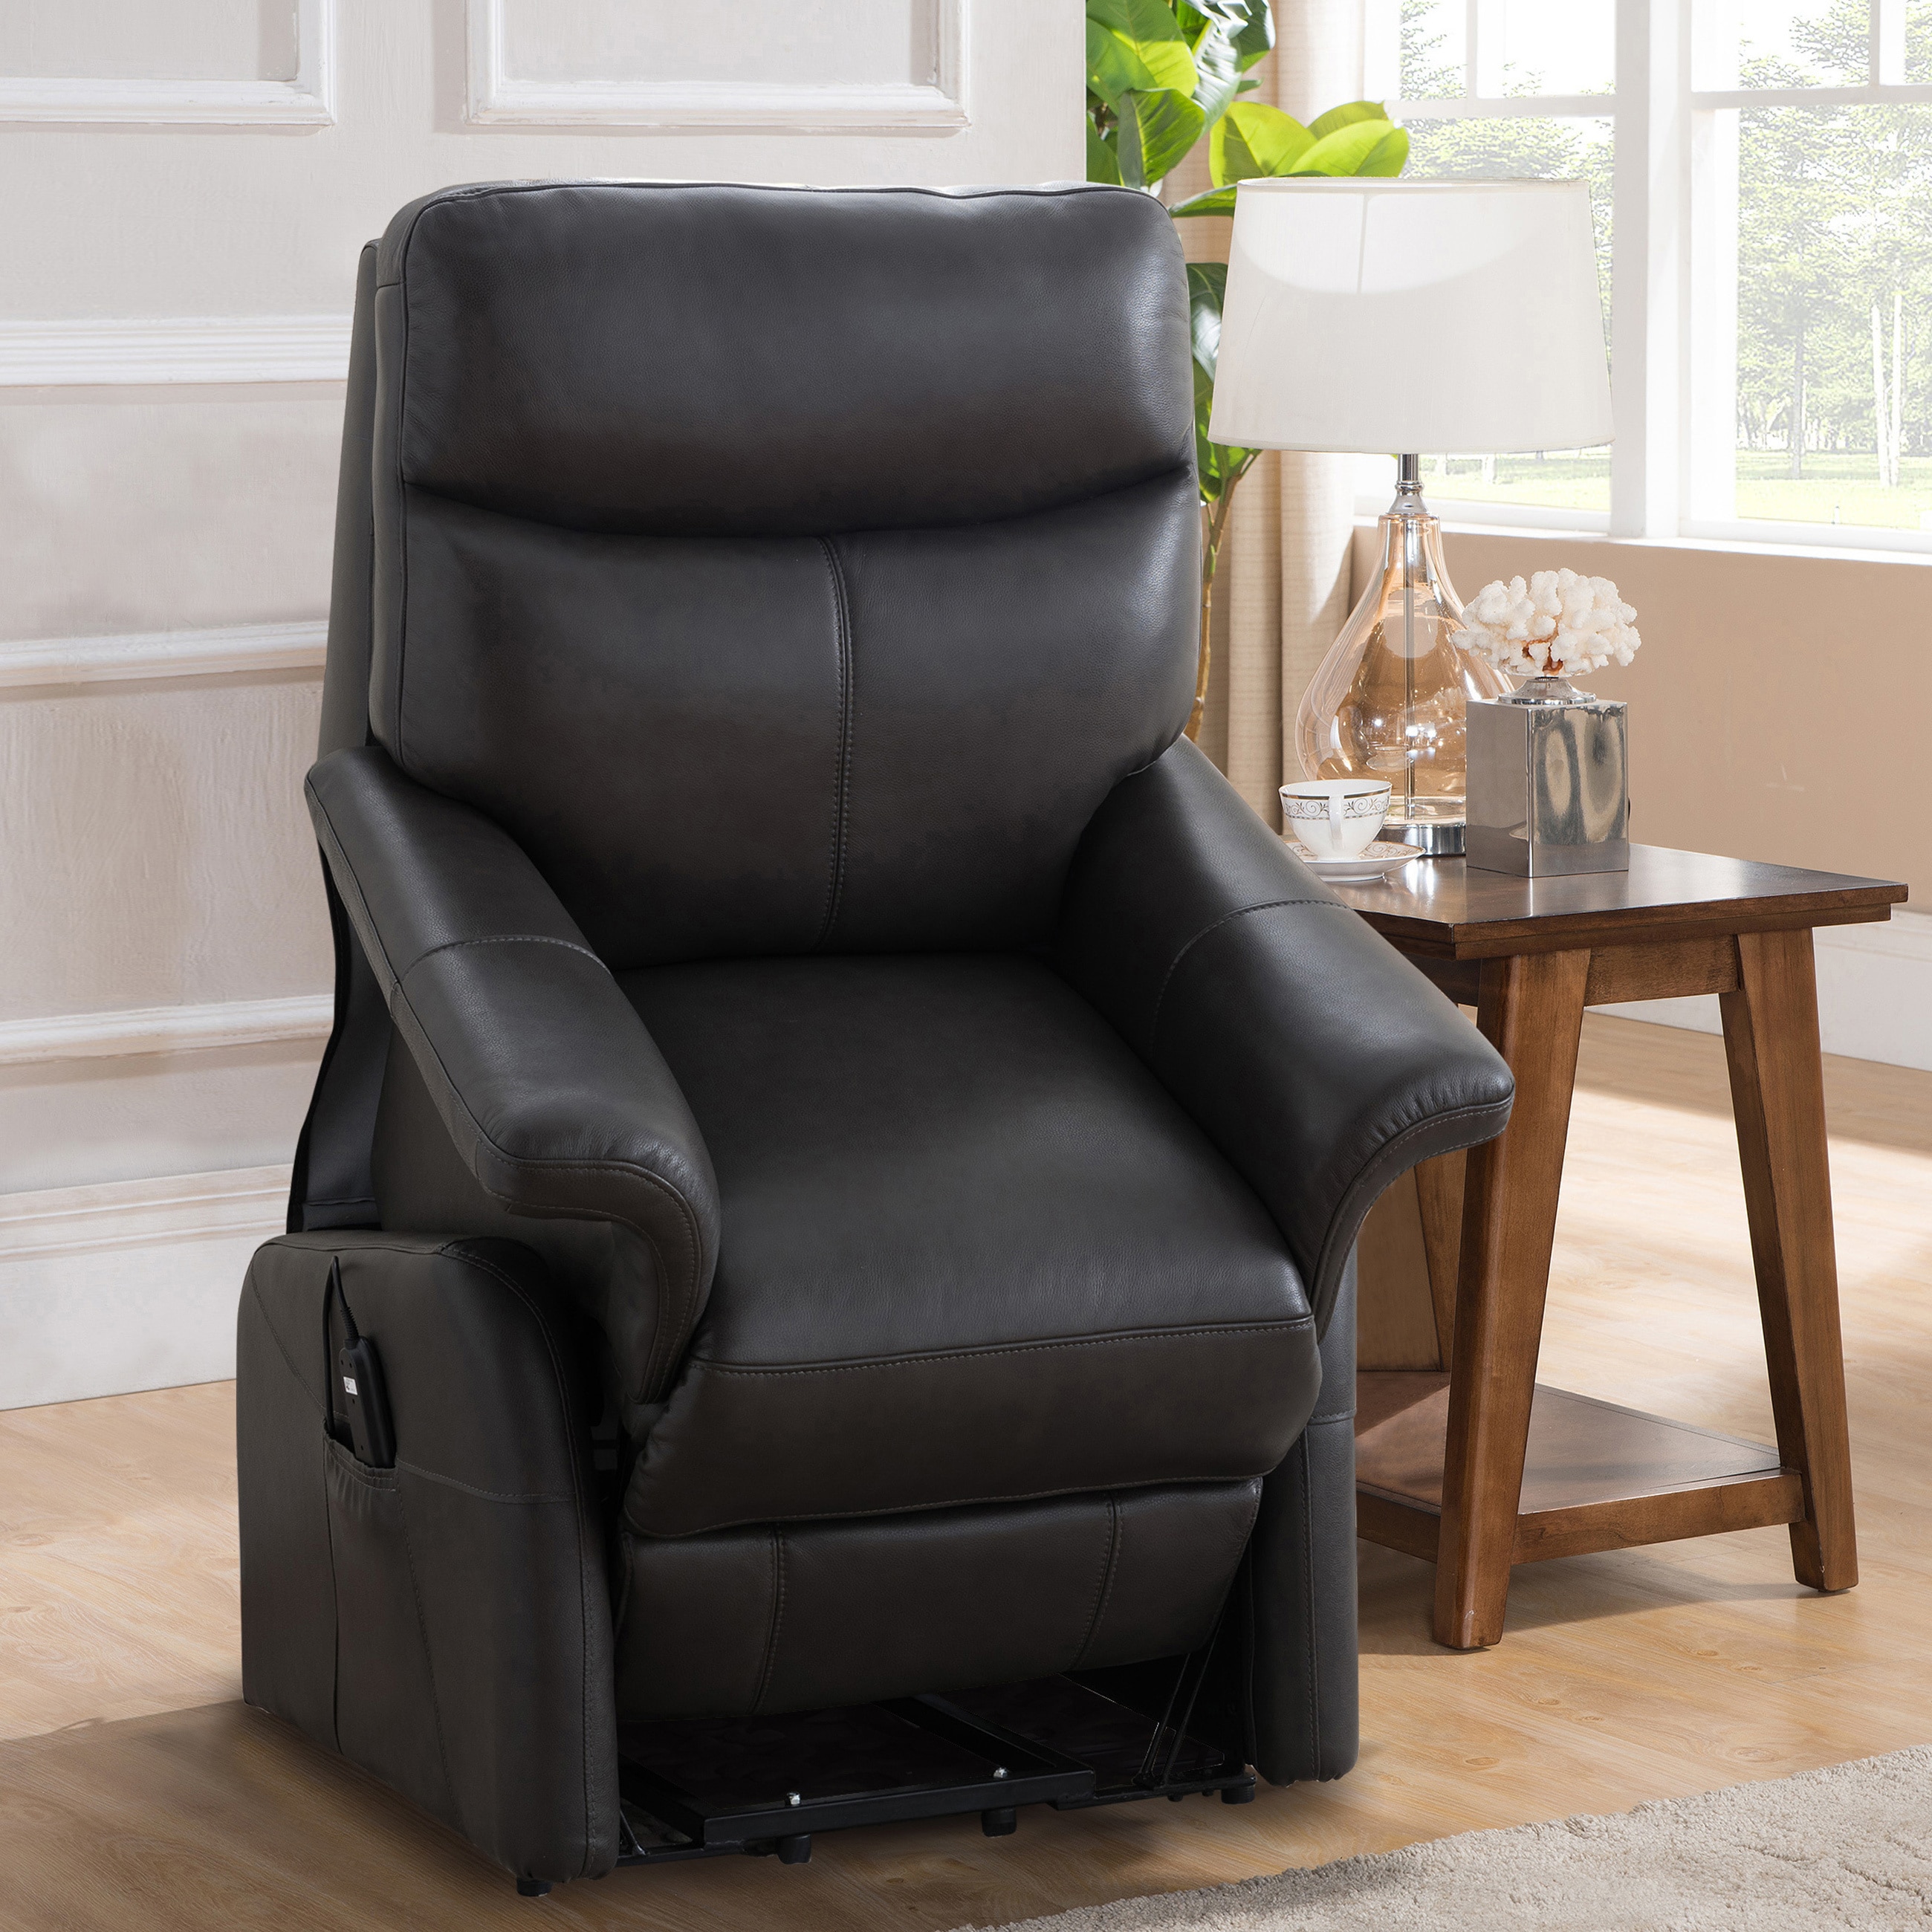 Chair With Power Lift Lift Chairs